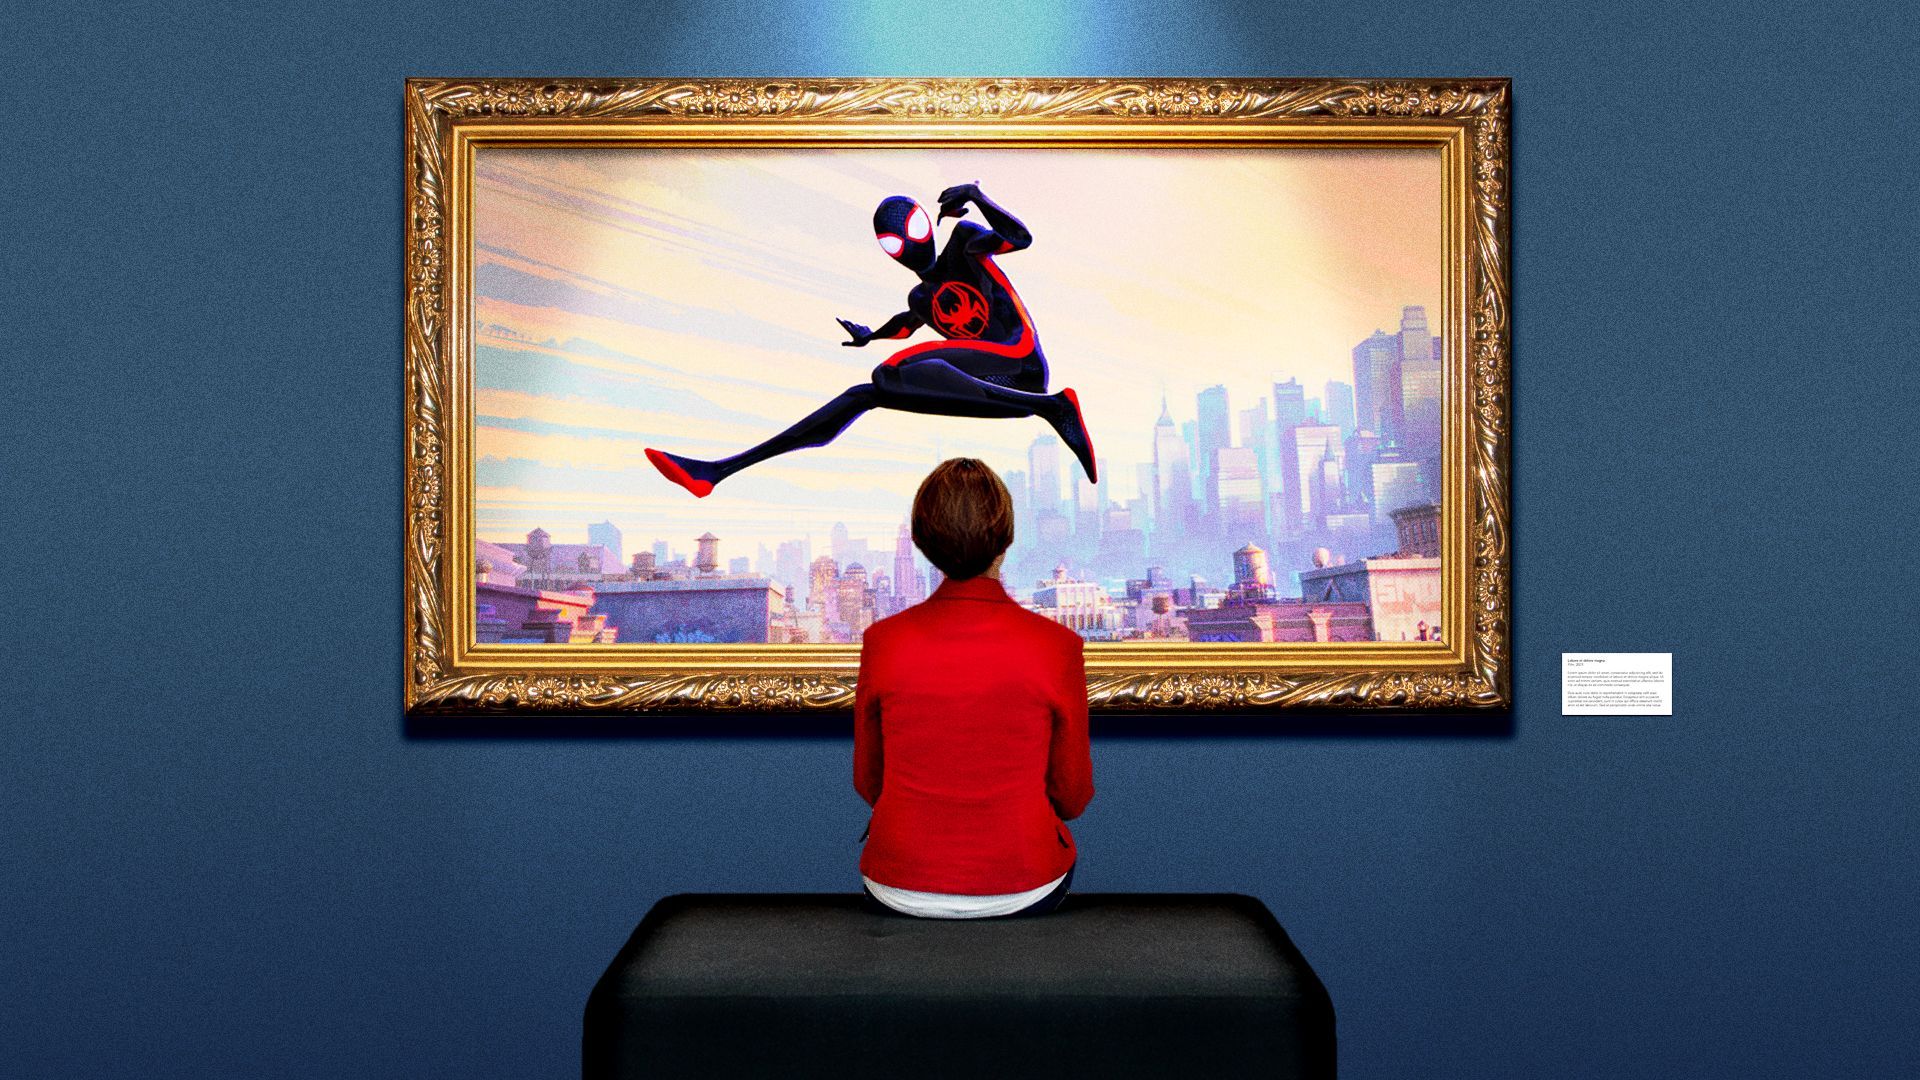 Movie Review: 'Spider-Man: Across the Spider-verse' one of the